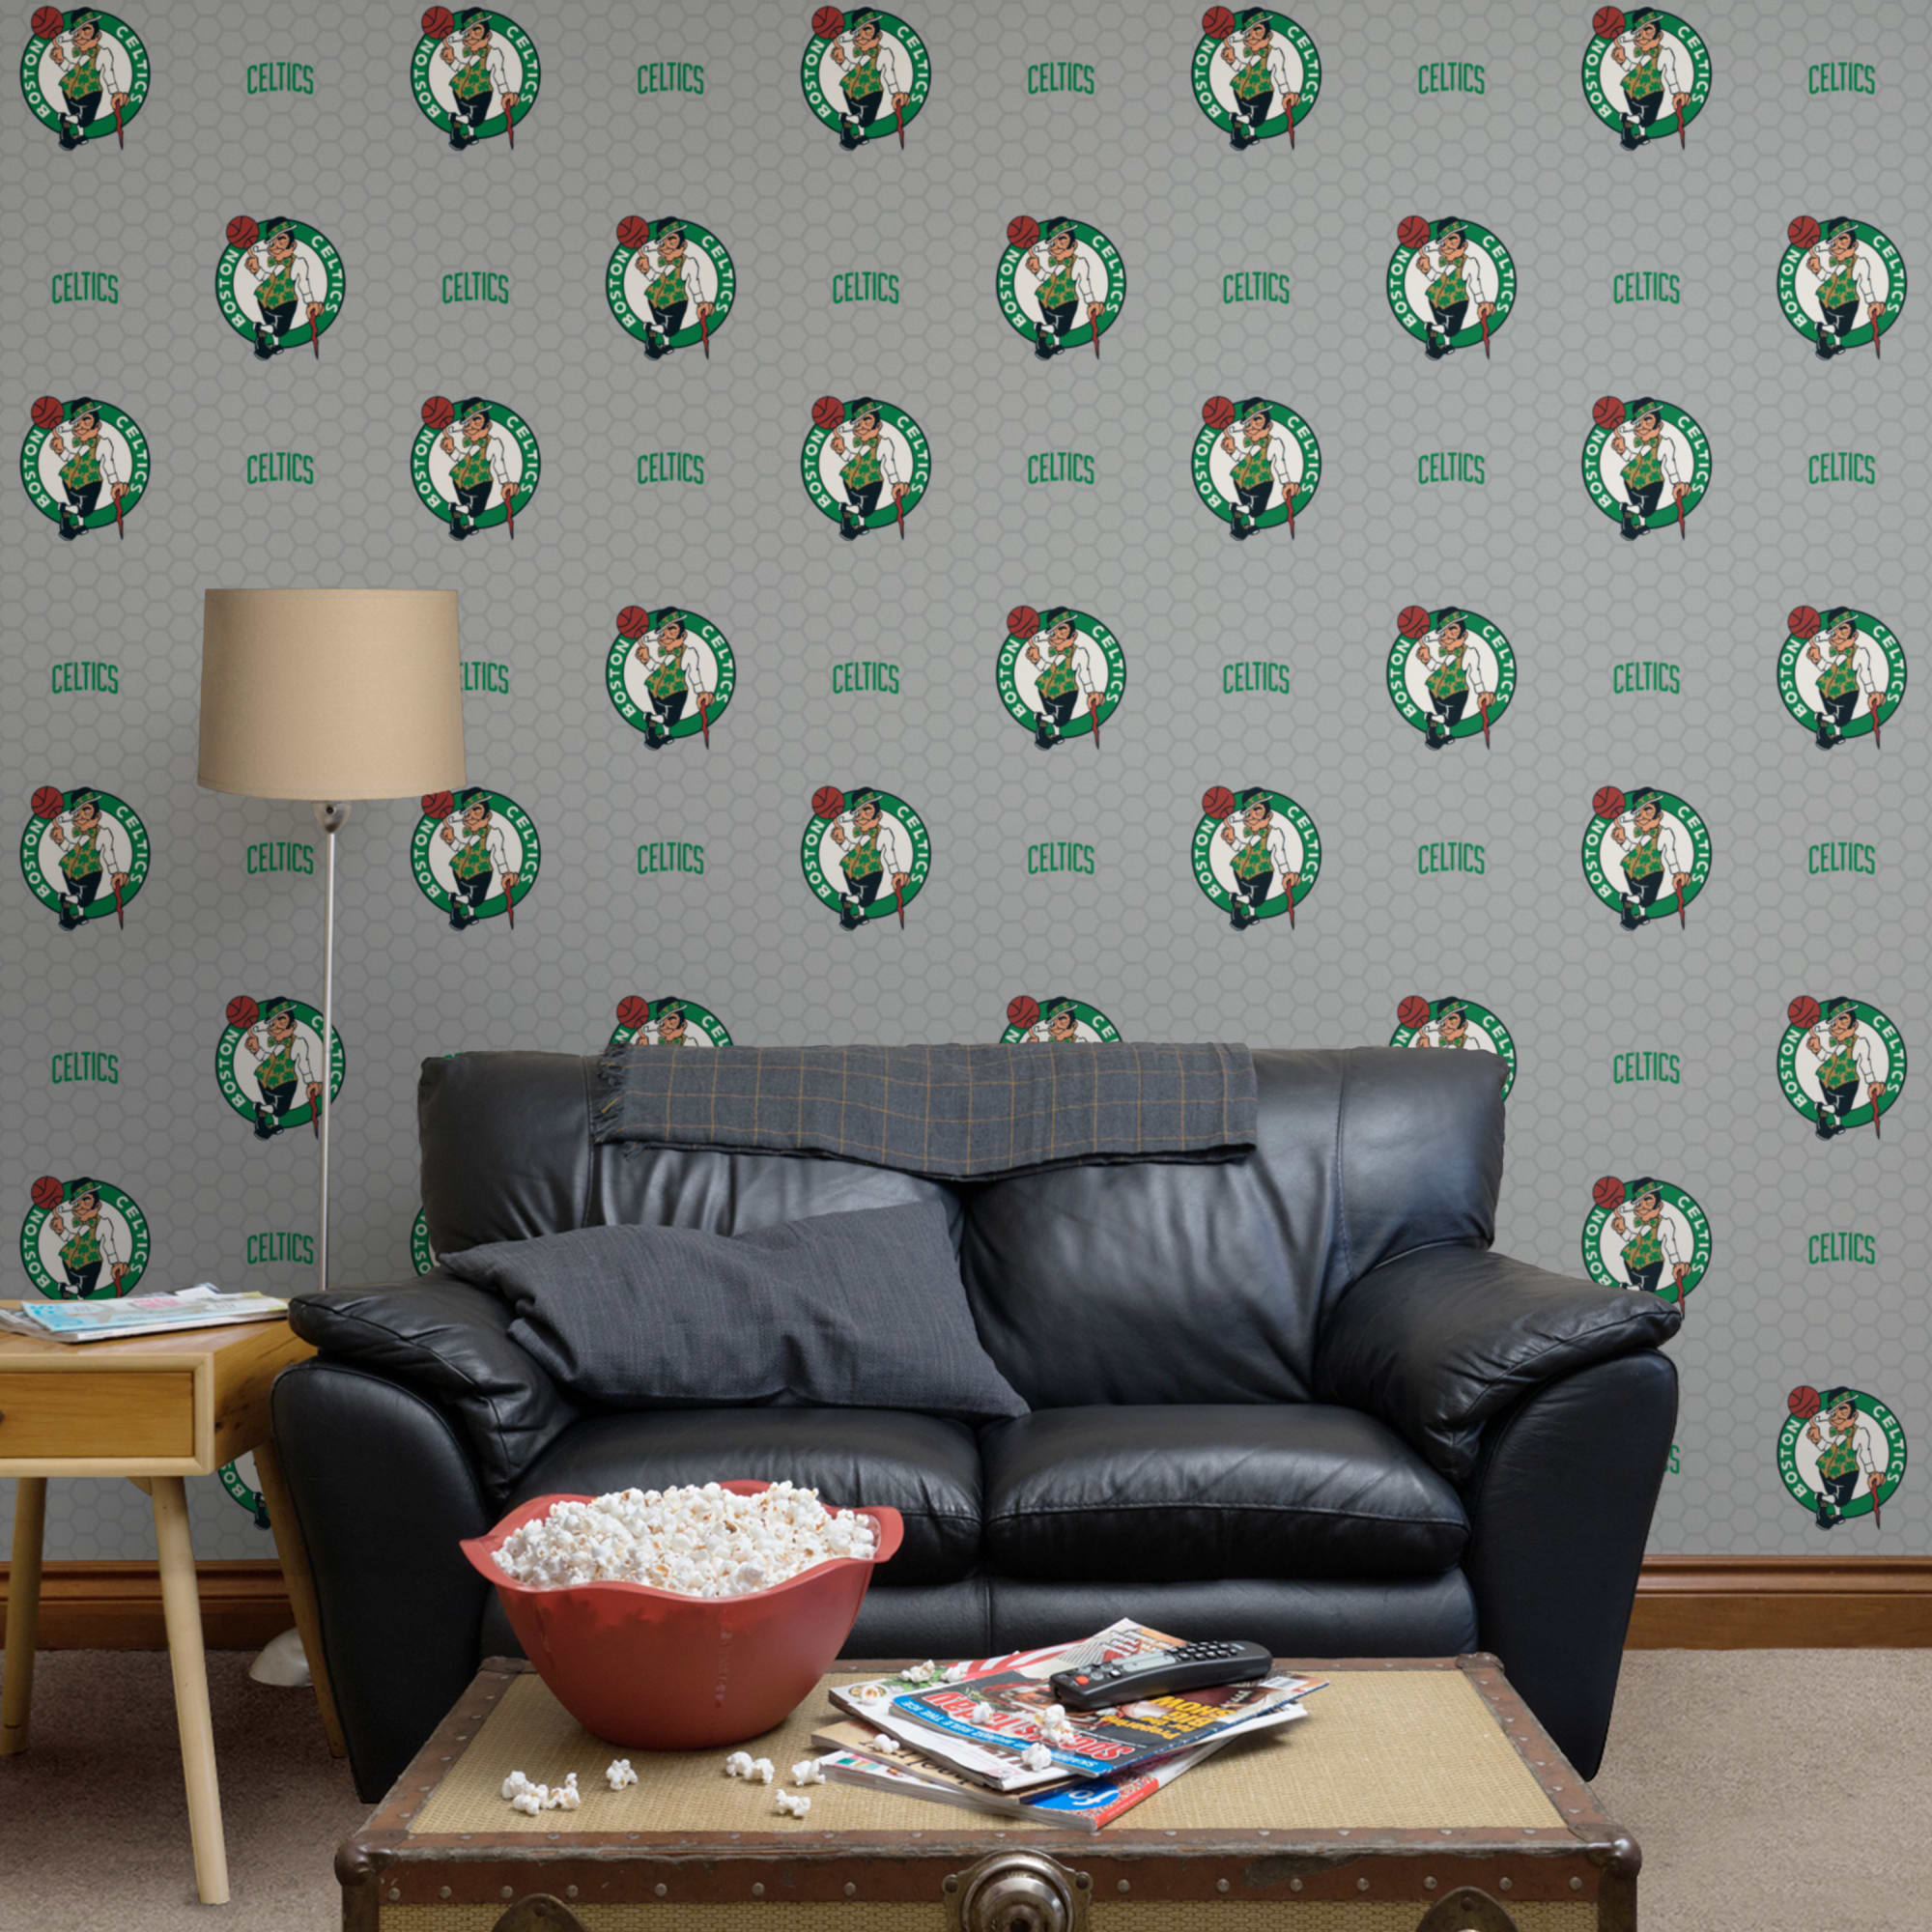 Boston Celtics: Logo Pattern - Officially Licensed Removable Wallpaper 12" x 12" Sample by Fathead